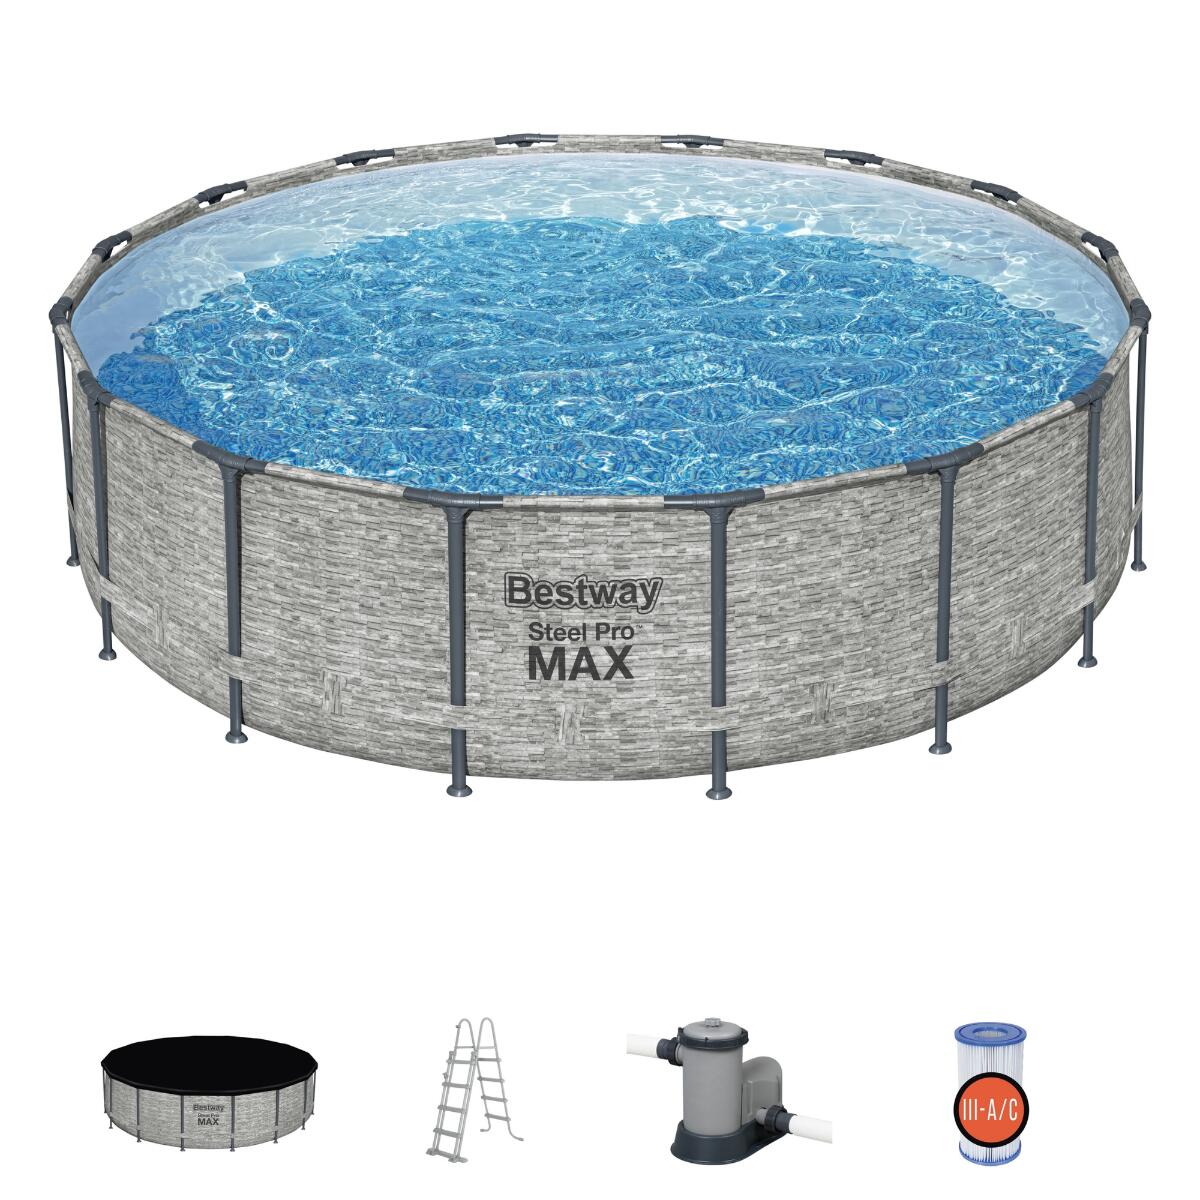 Bestway 16ft x 48" Steel Pro MAX Round Above Ground Swimming Pool 3/7